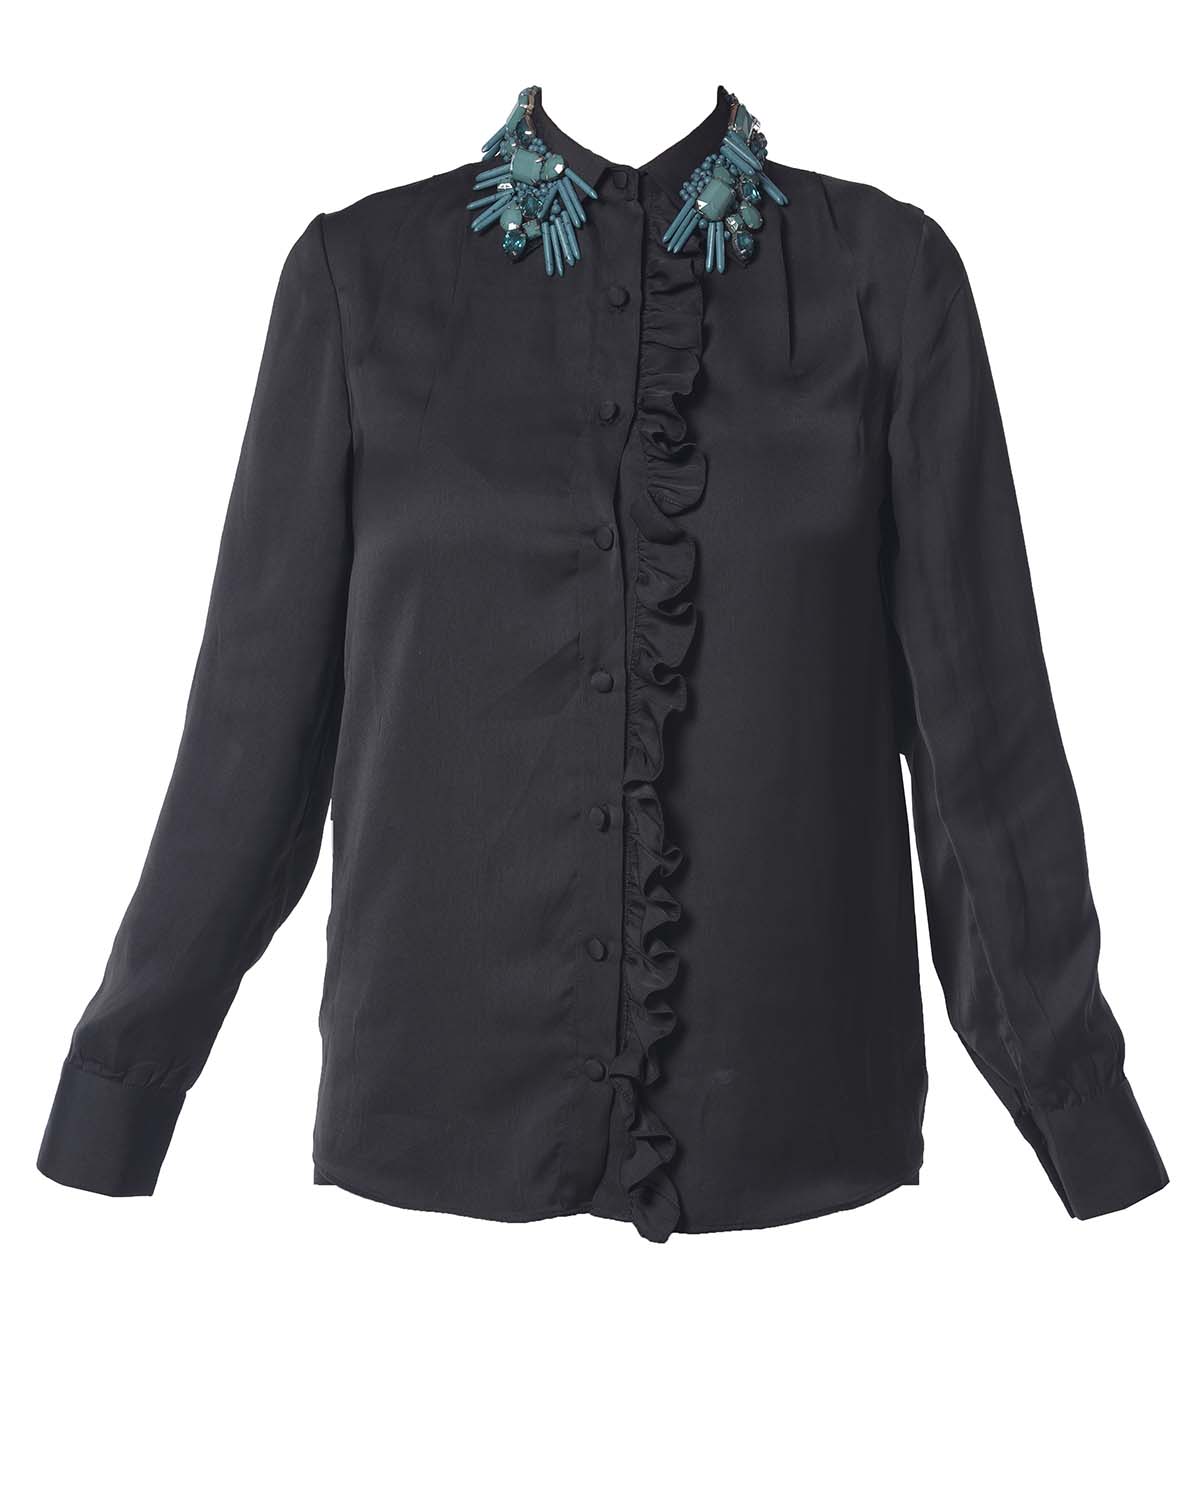 Black ruffle shirt with embroidered collar